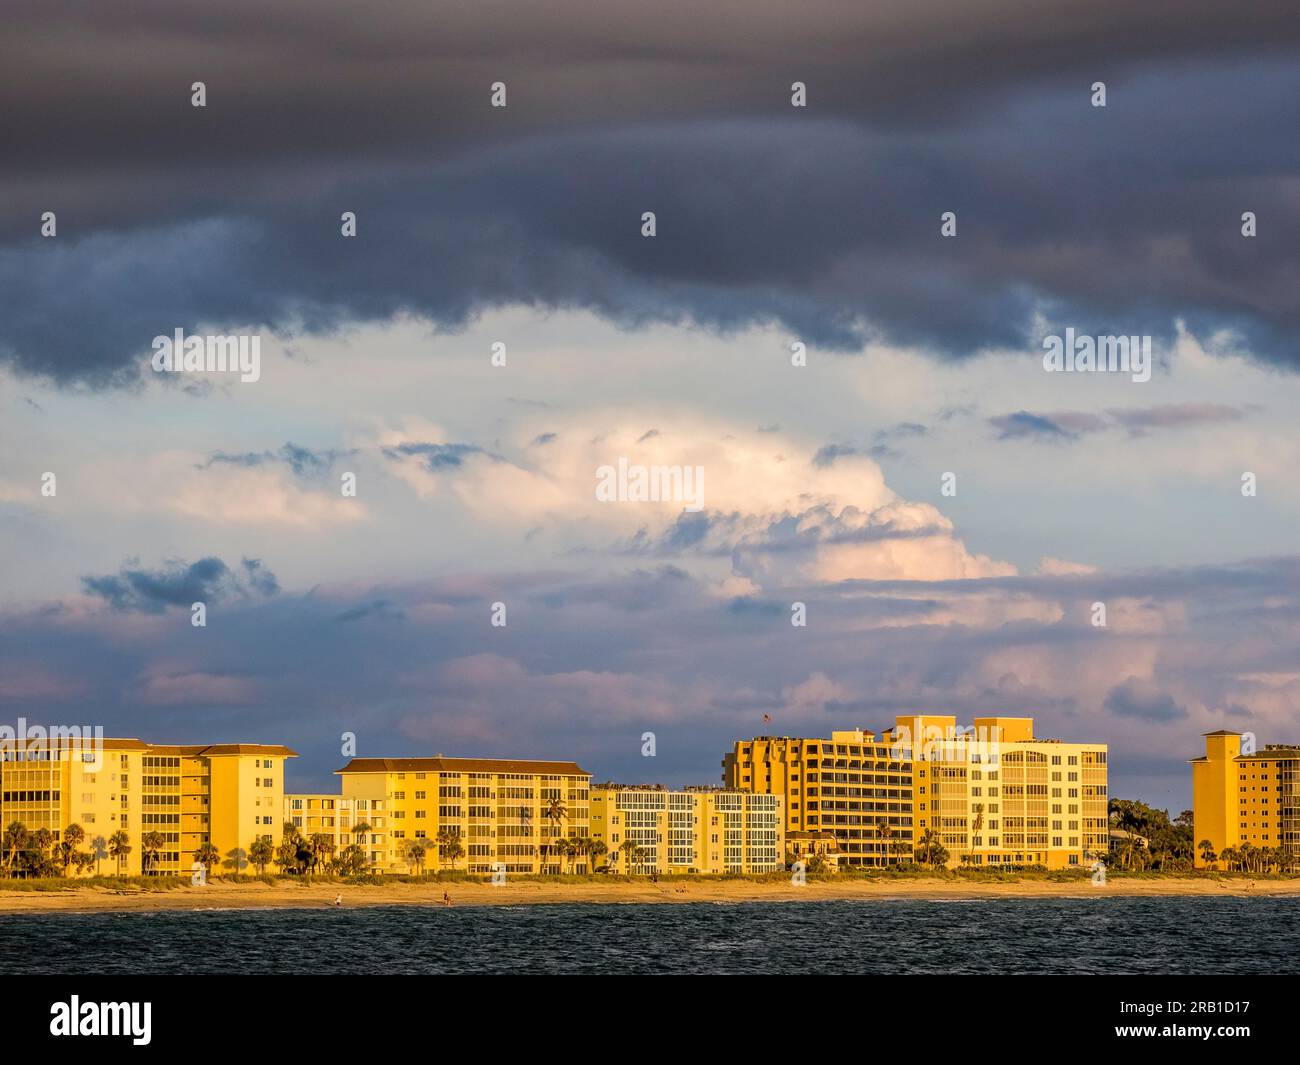 Storm in the sky over Venice Florida and the Gulf of Mexico Stock Photo